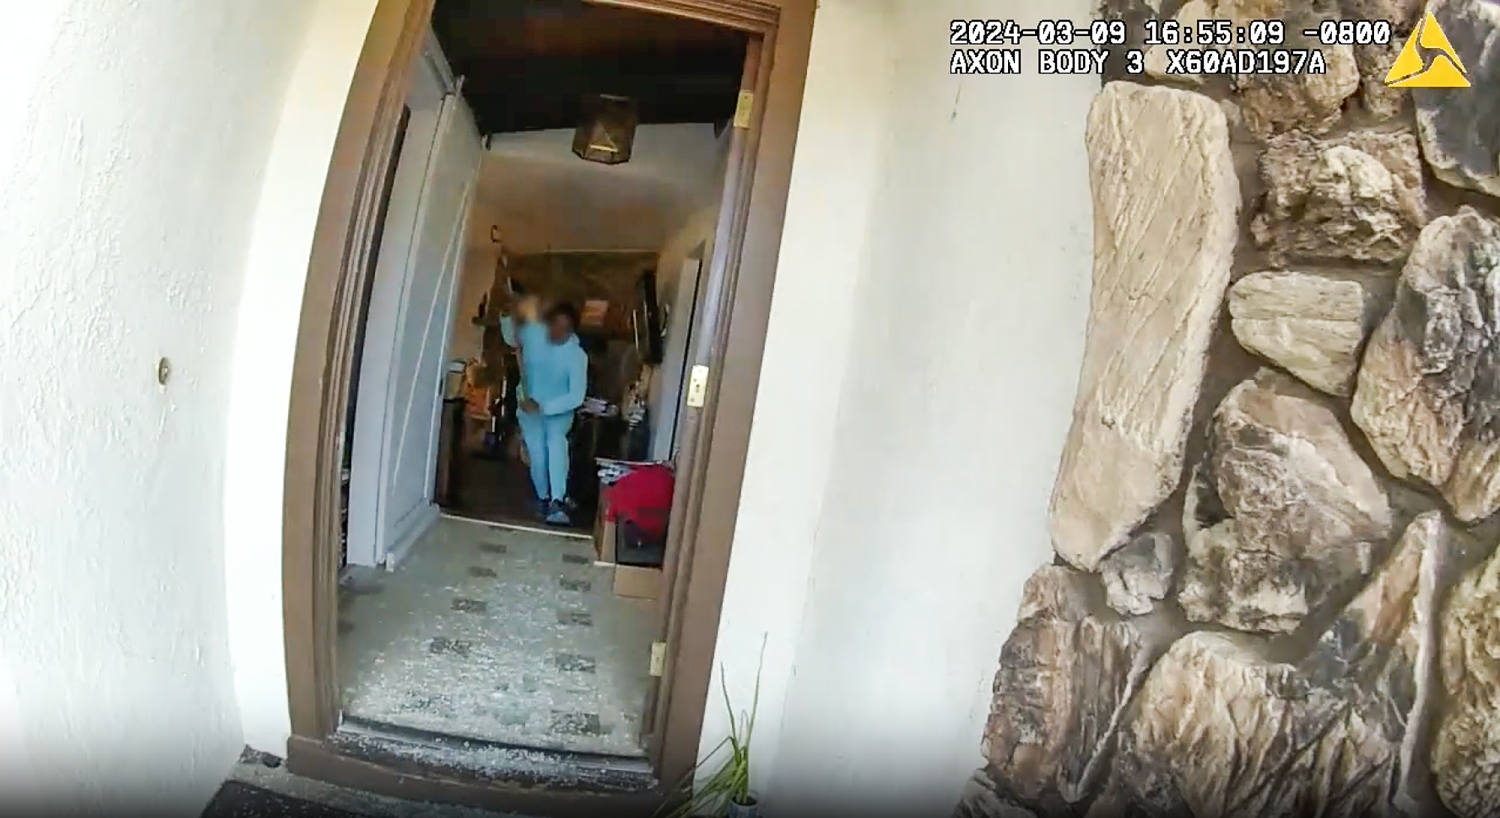 Bodycam video shows fatal shooting of autistic California teen who charged deputy with garden tool